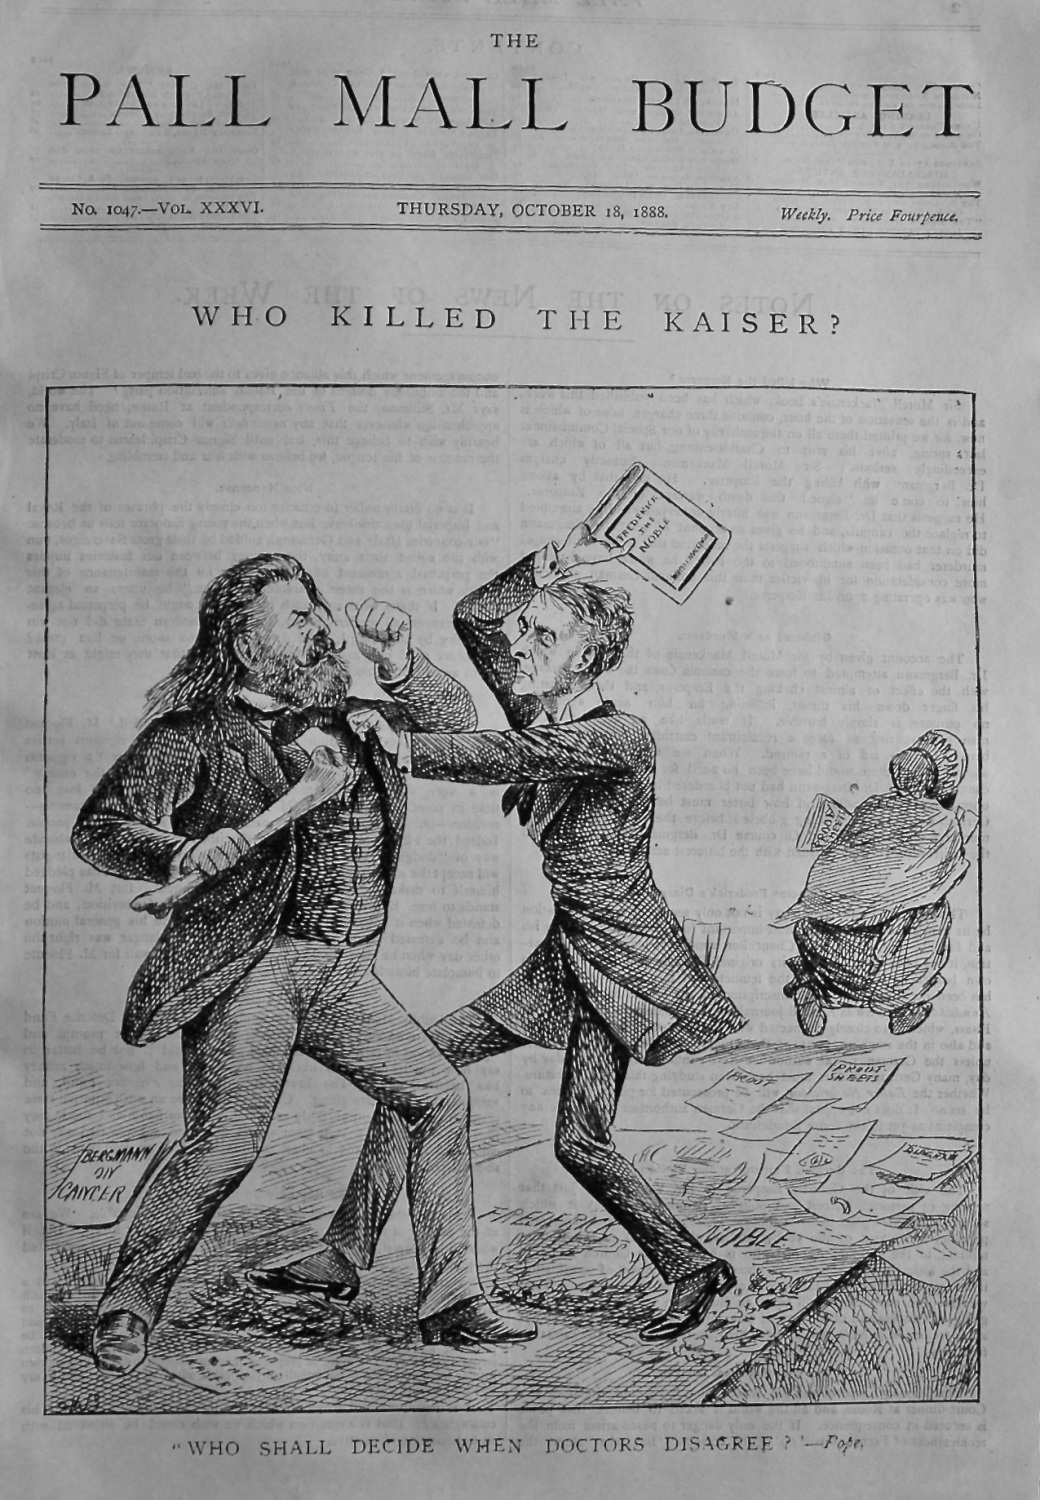 The Pall Mall Budget, (Front Page). Who Killed the Kaiser ?. 1888.